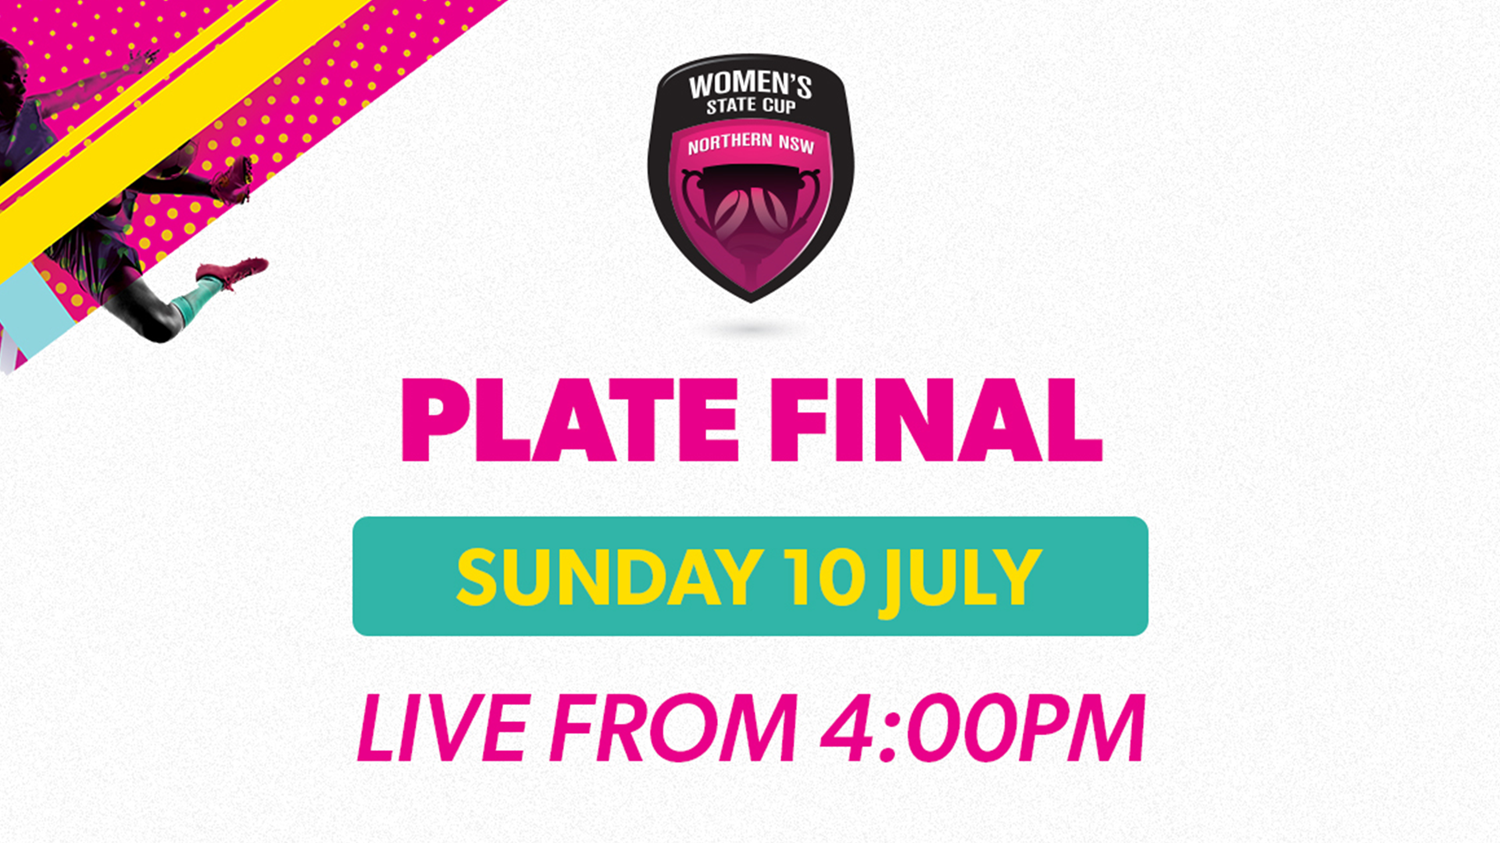 220710-Northern NSW Women's State Cup Women's State Cup Community Plate Final - Urunga FC v Cooks Hill United FC Minigame Slate Image